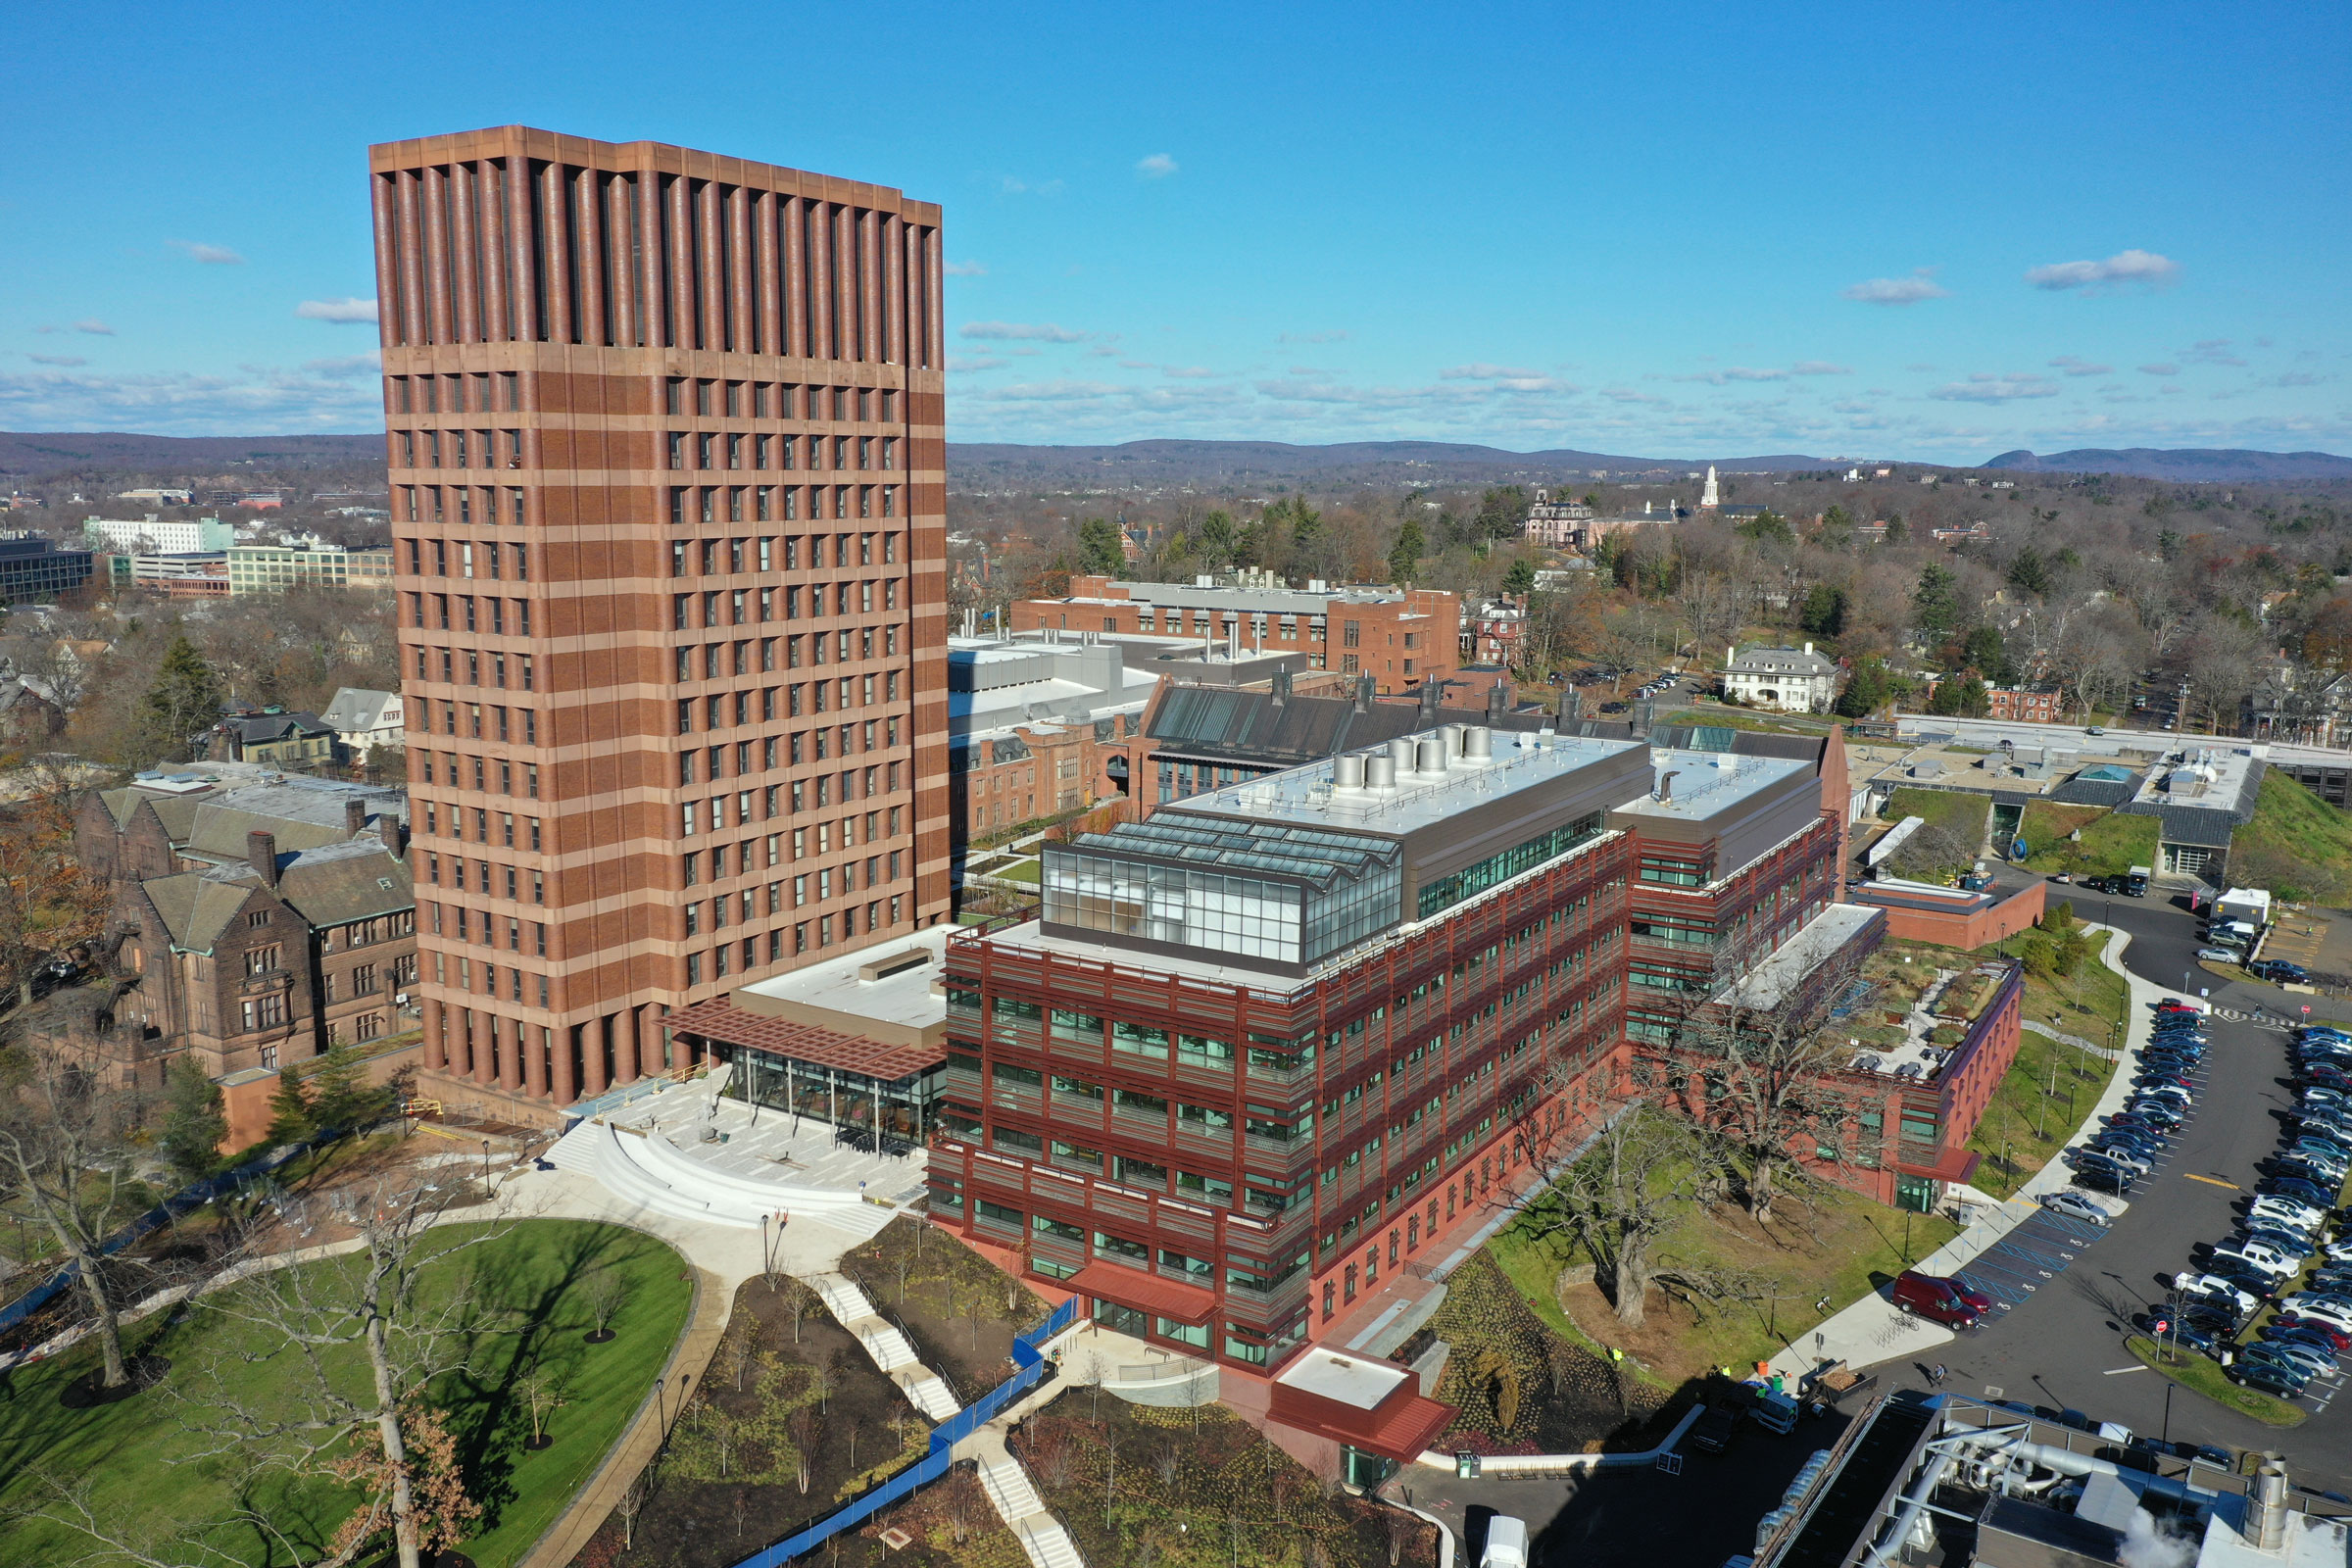 Aerial view of the Yale Science Building, the Pavilion, and the Kline Tower